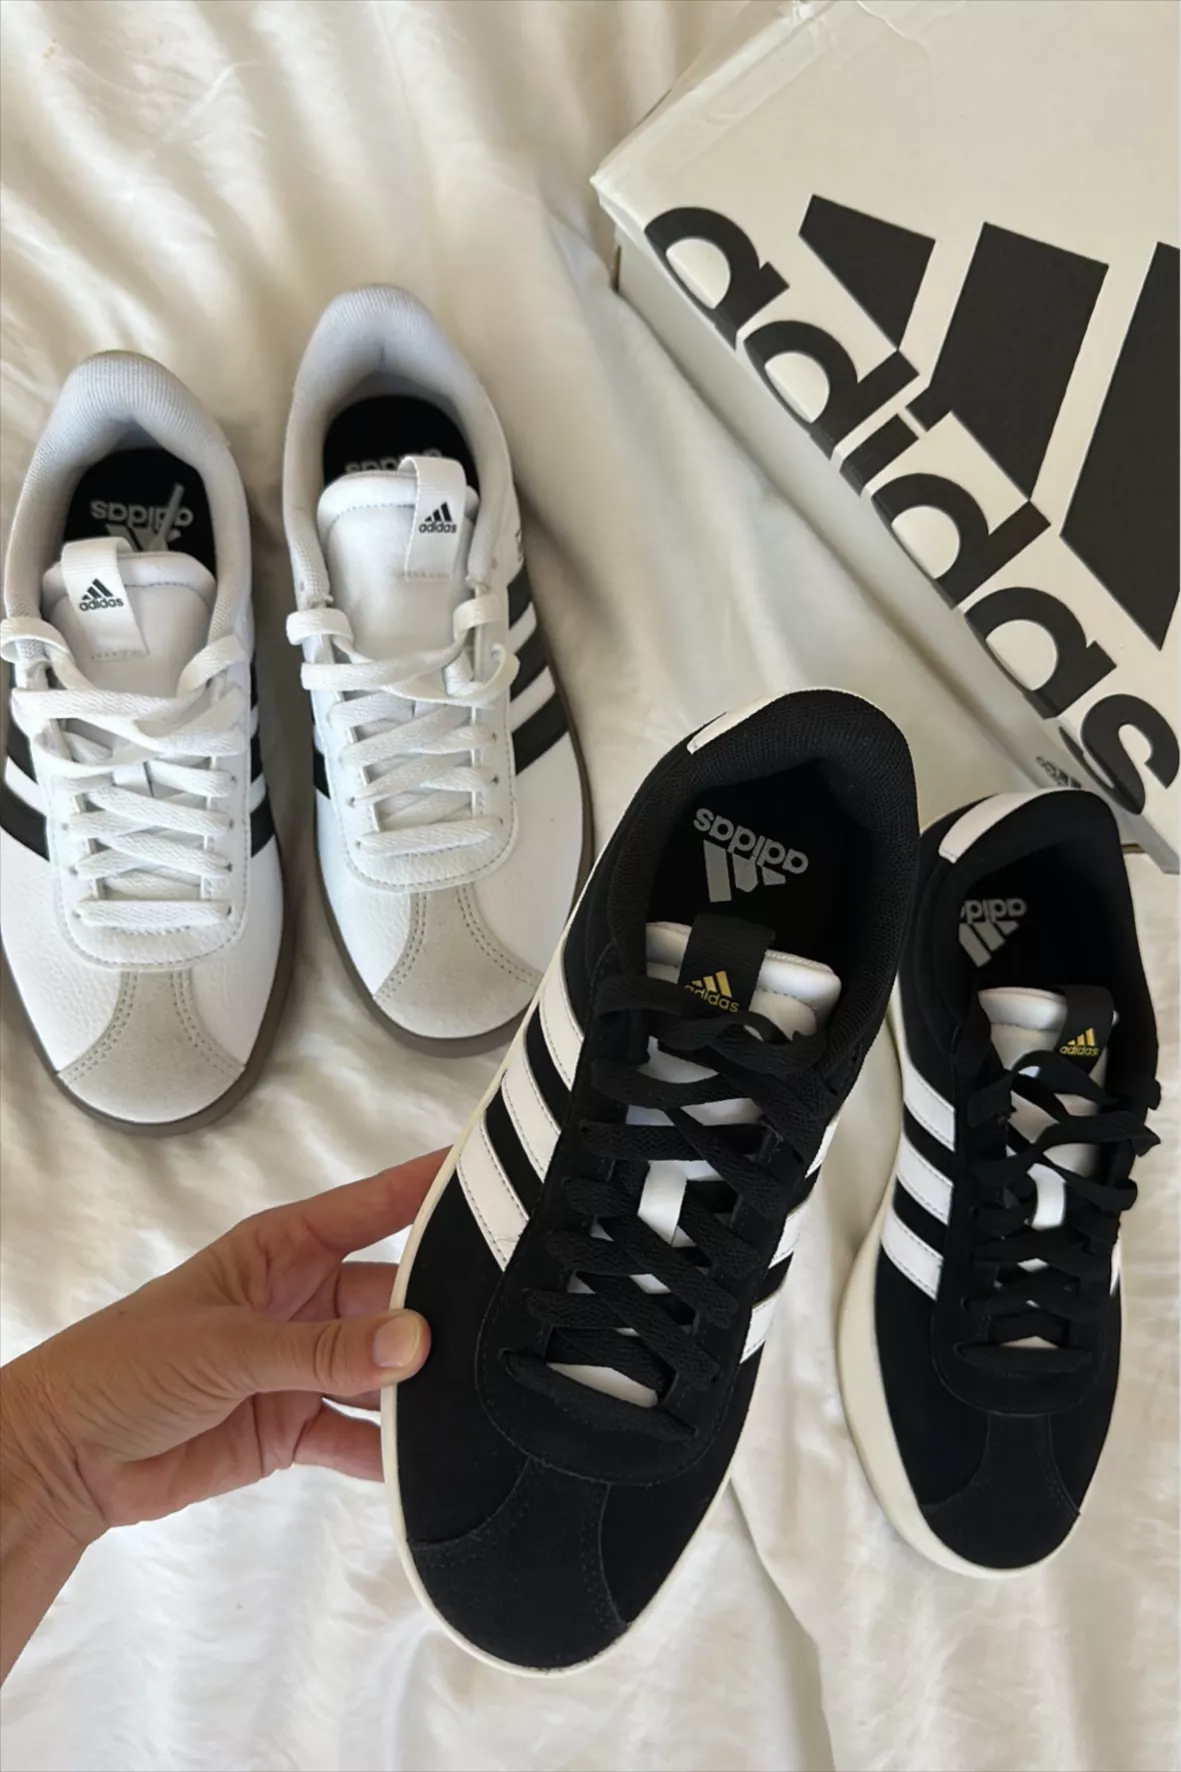 Adidas - VL Court 2.0 Fashion Sneakers for Women